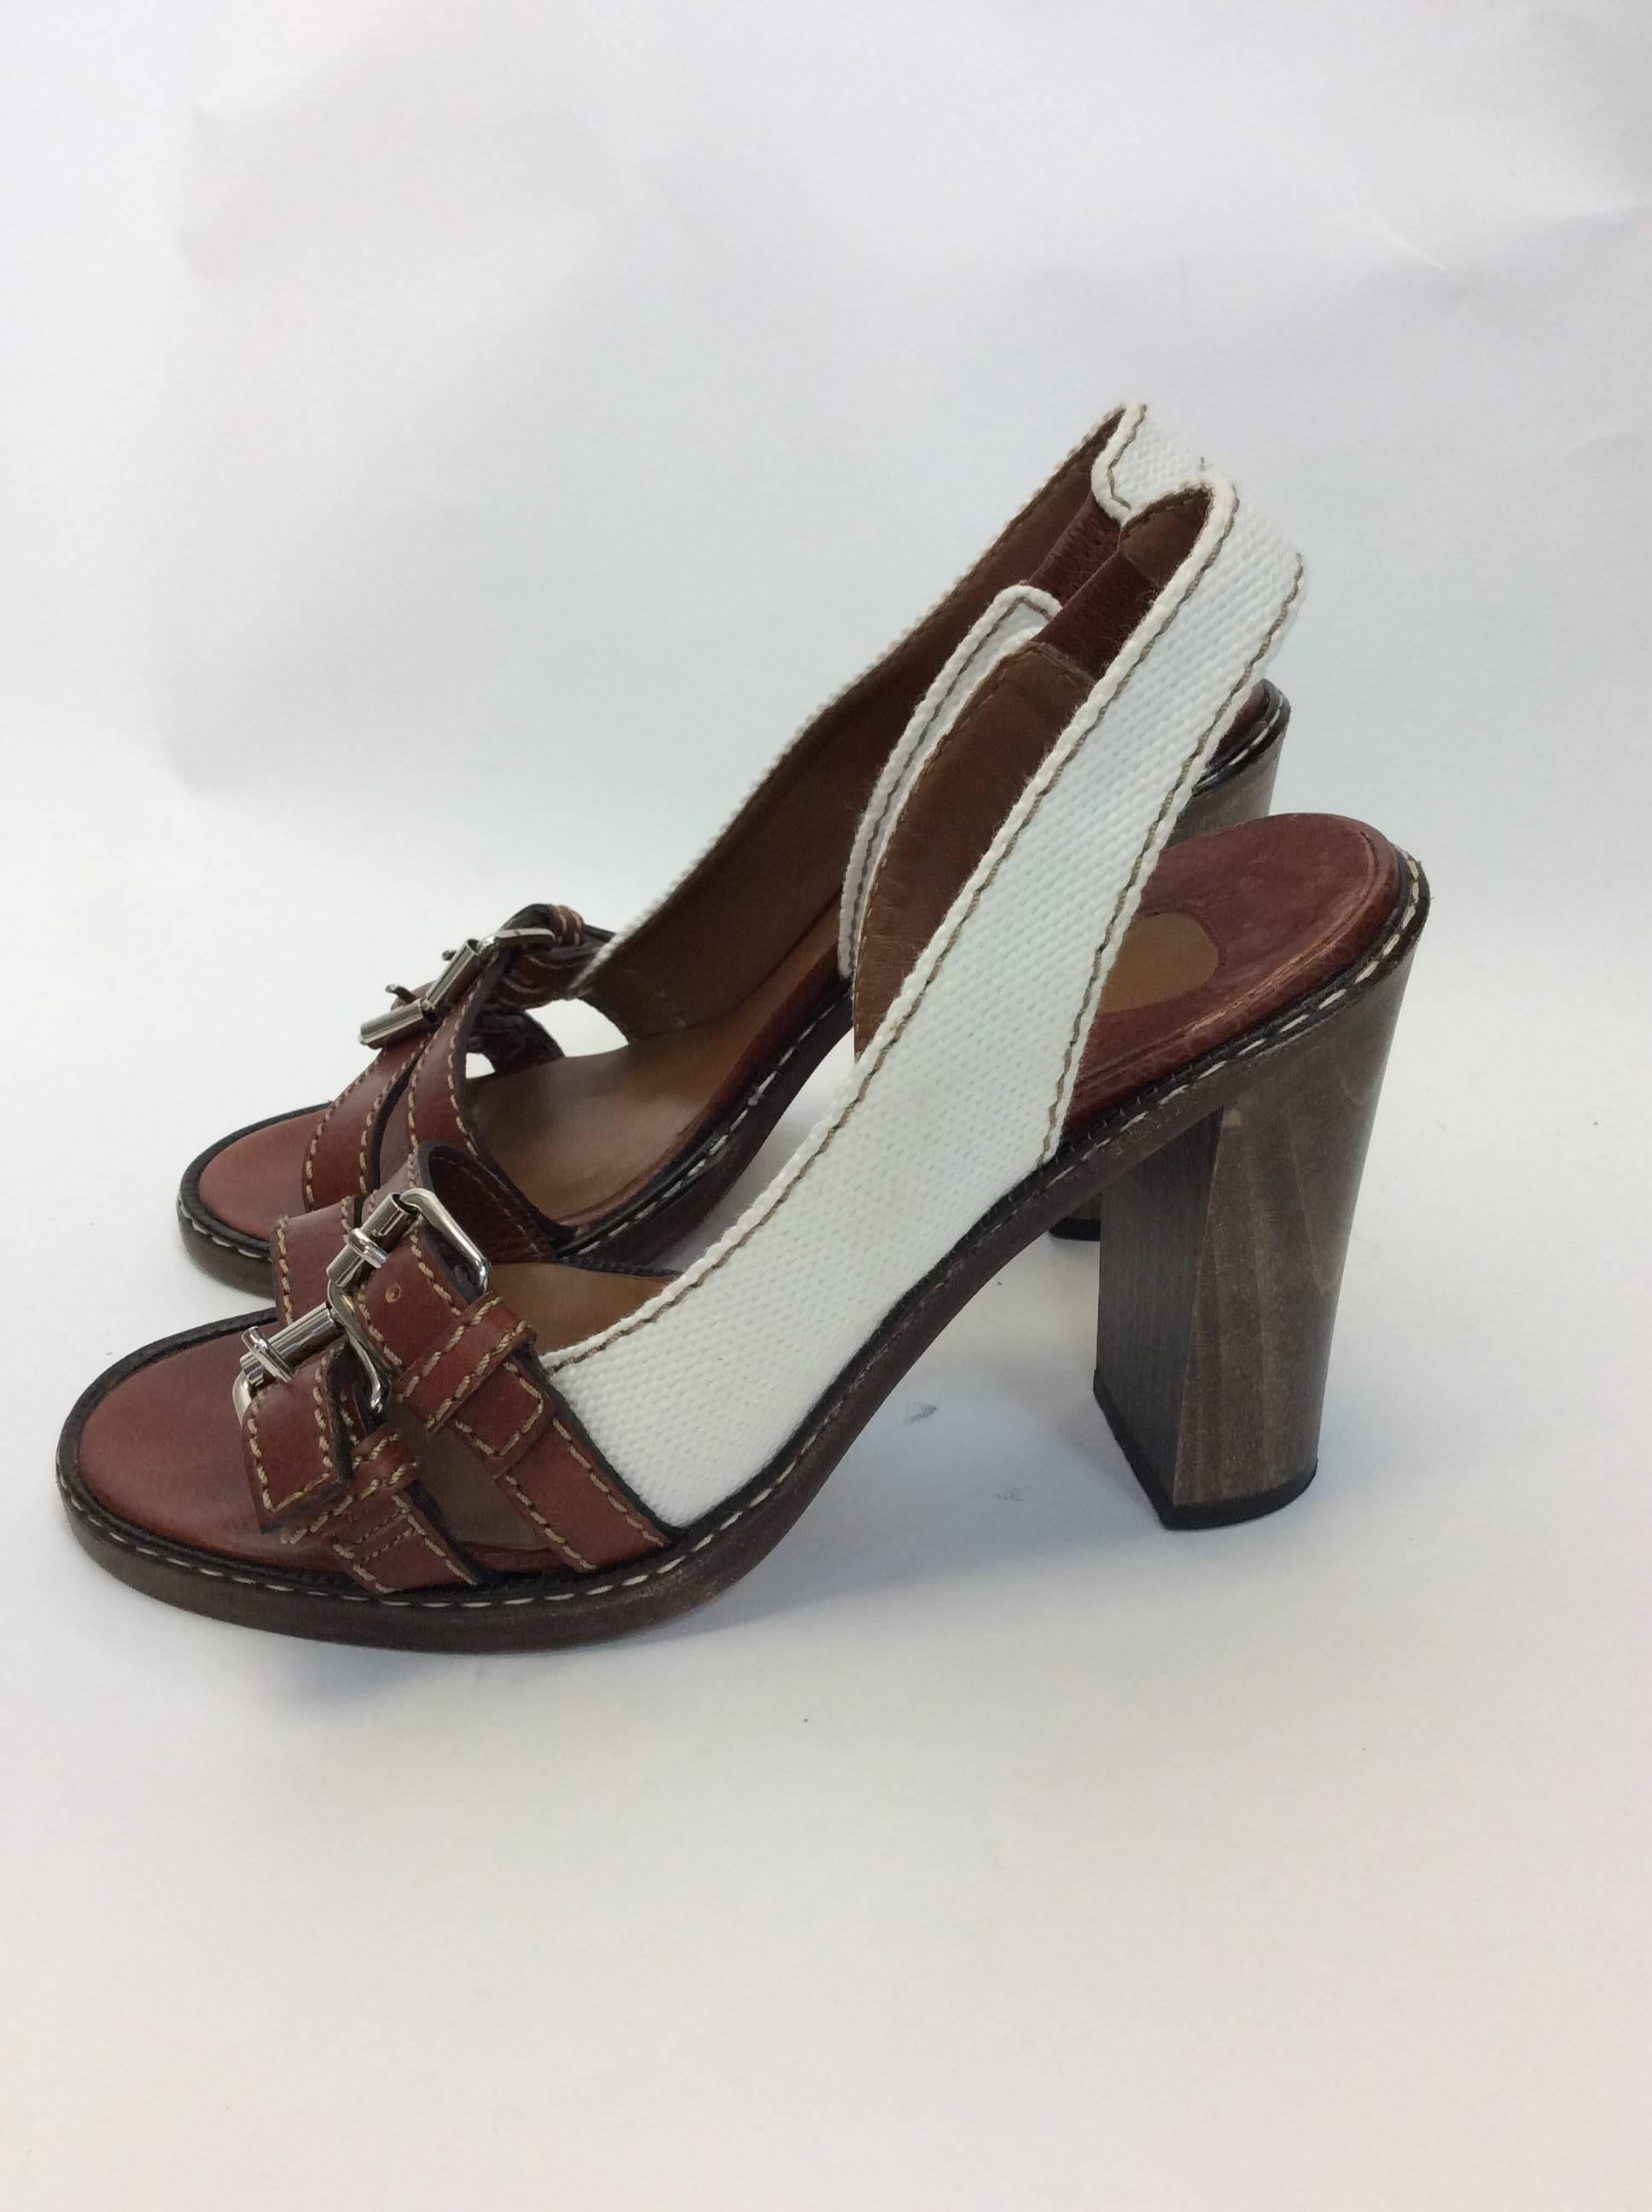 Chloe Leather Buckle Canvas Heels
Leather straps with buckle
canvas cream ankle strap
Wooden heel
Size 38
4 inch heel 
$208
